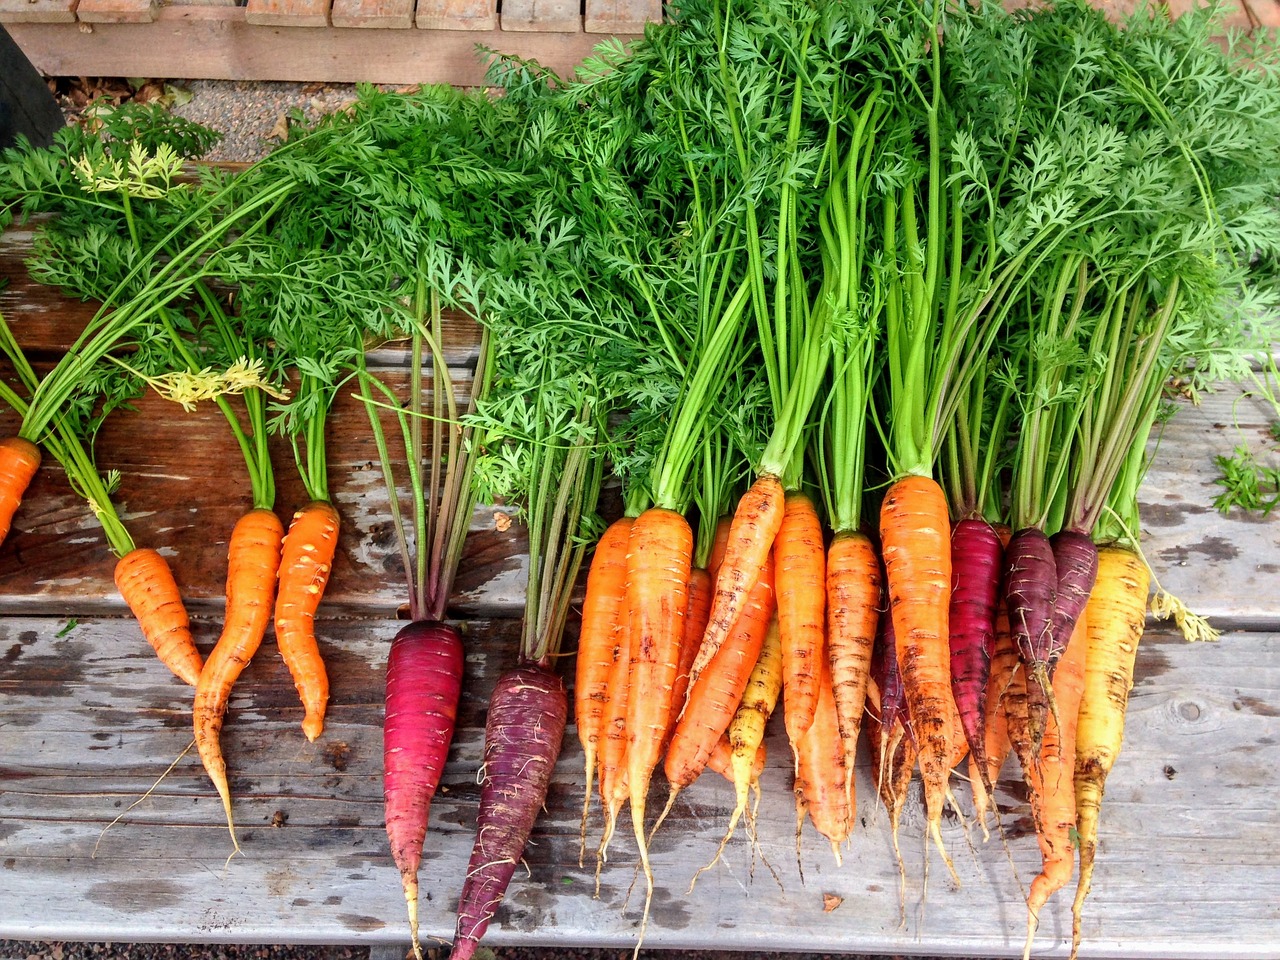 Download free photo of Carrot,carrots,produce,food,vegetable - from needpix.com